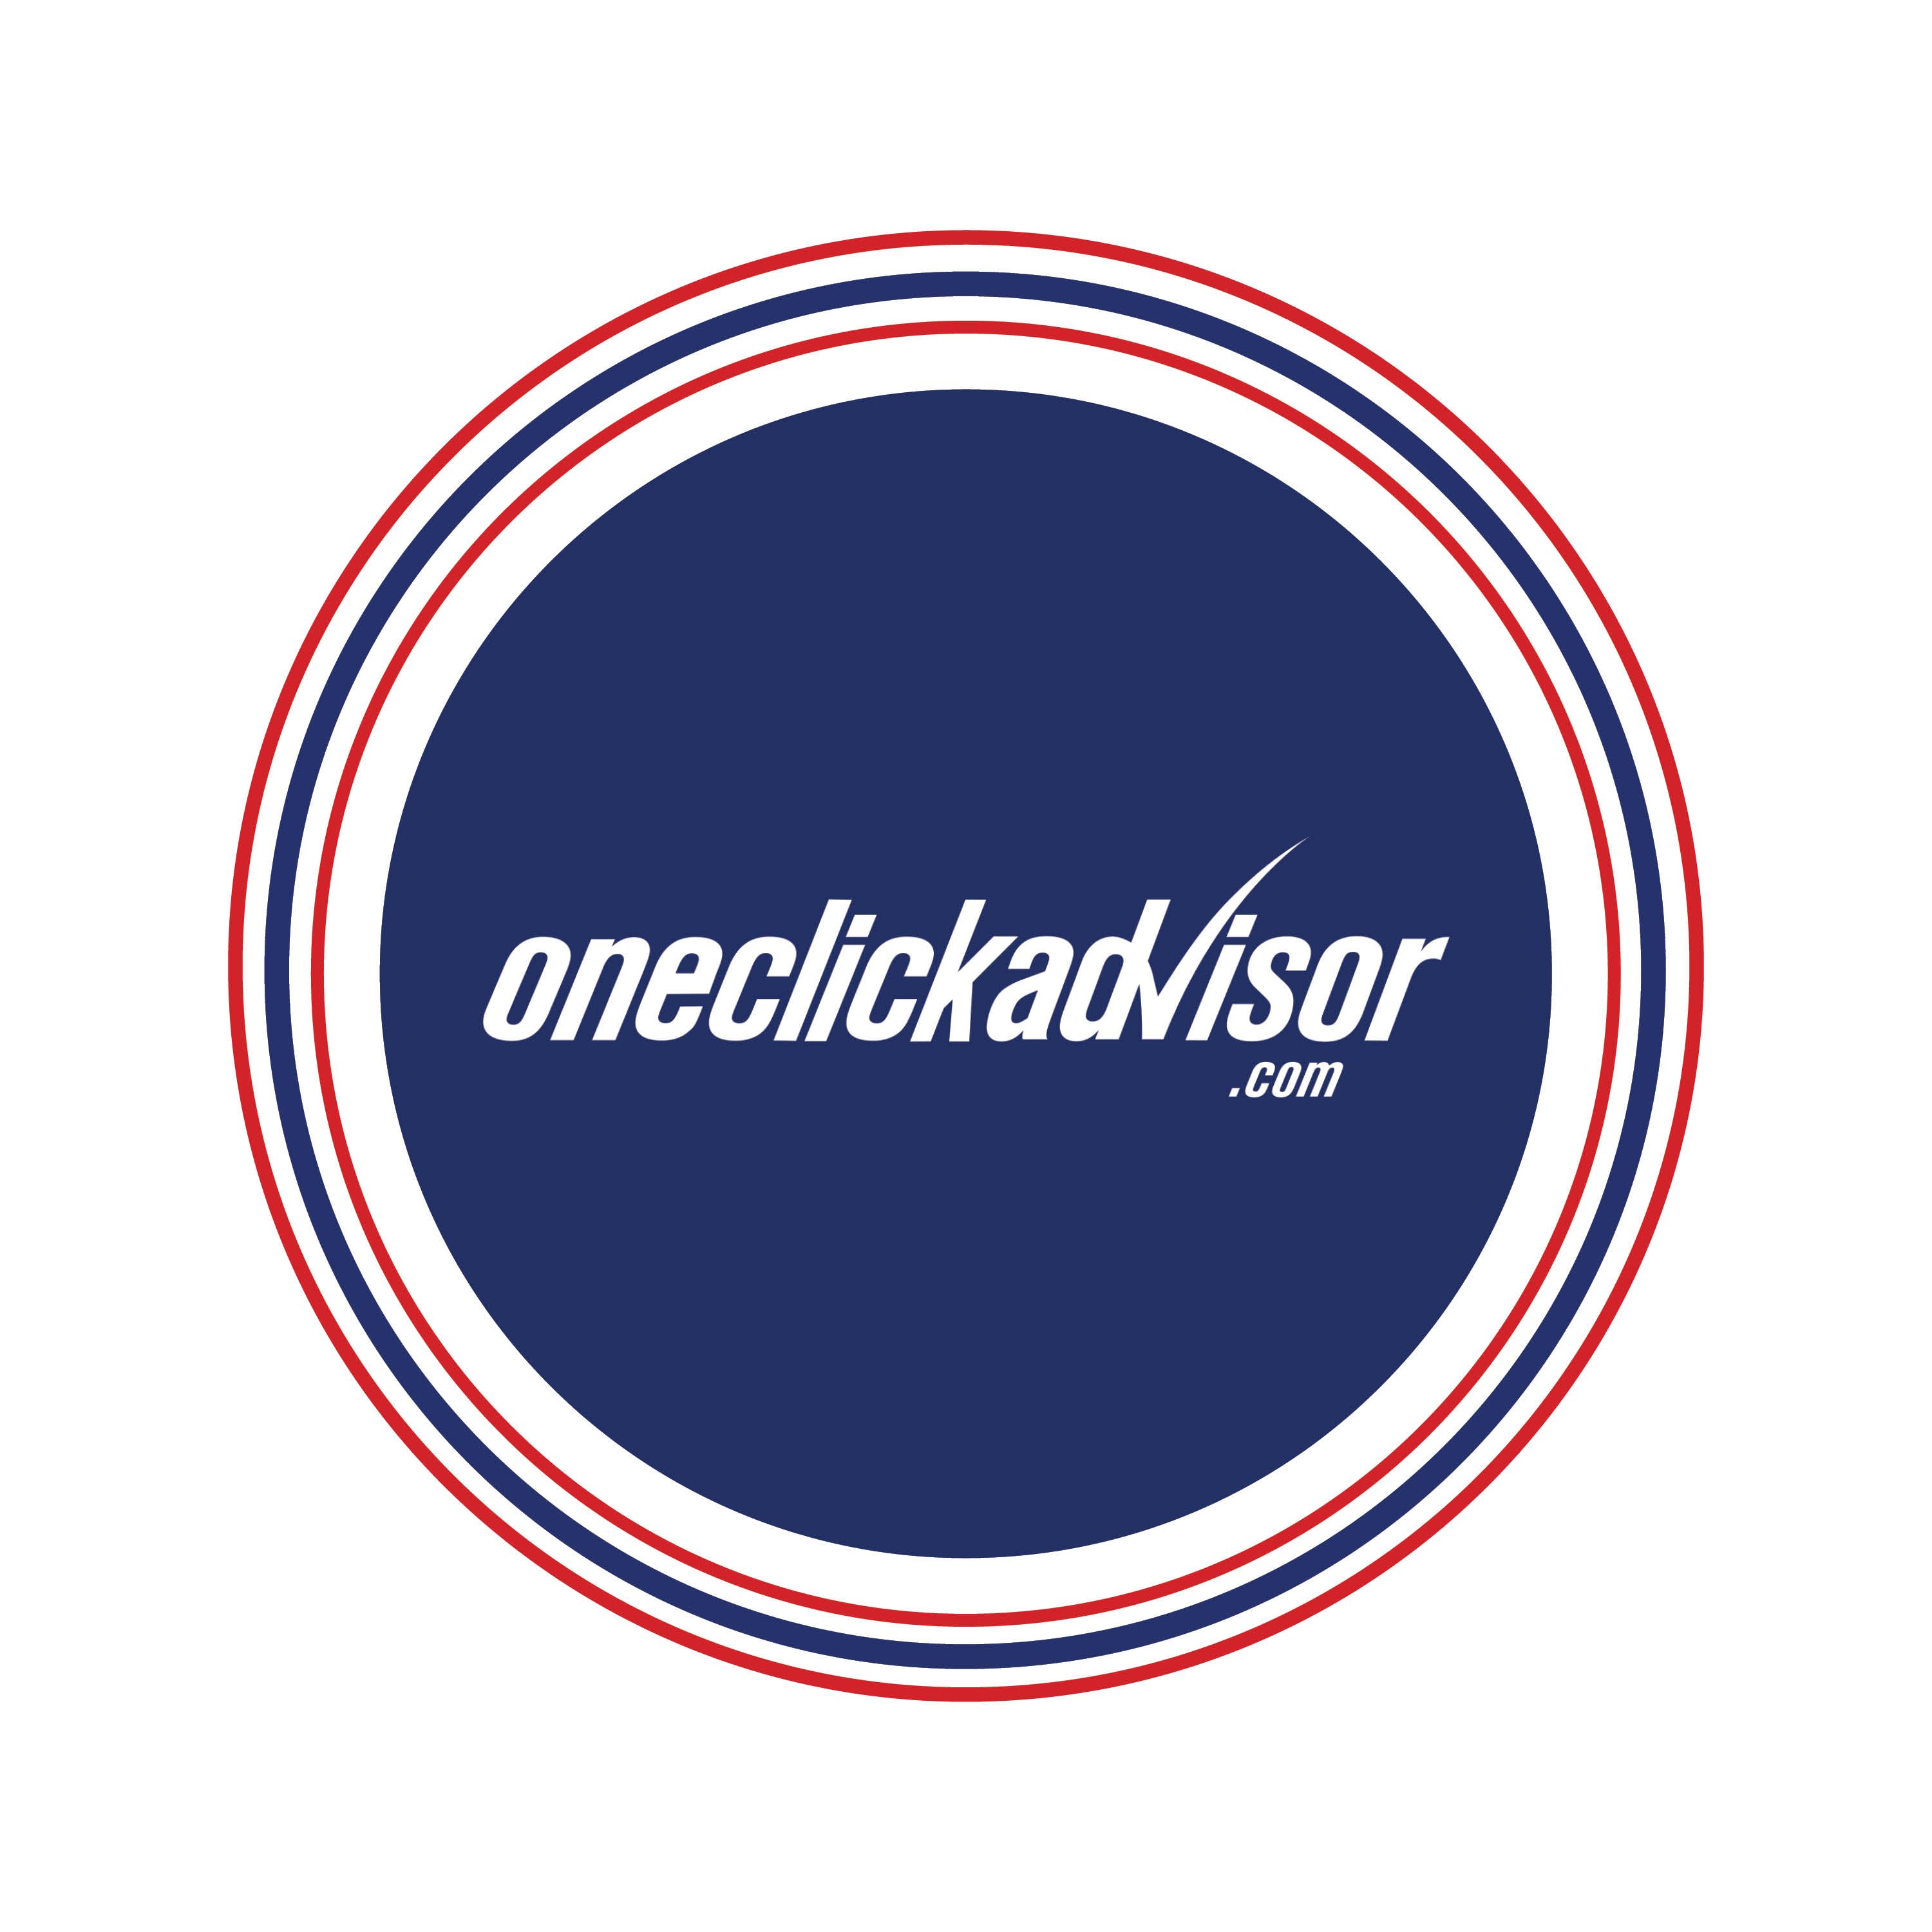 OneClickAdvisor is a helping hand for owners of startups and small businesses. Form, market, operate, and finance your business all in one place.